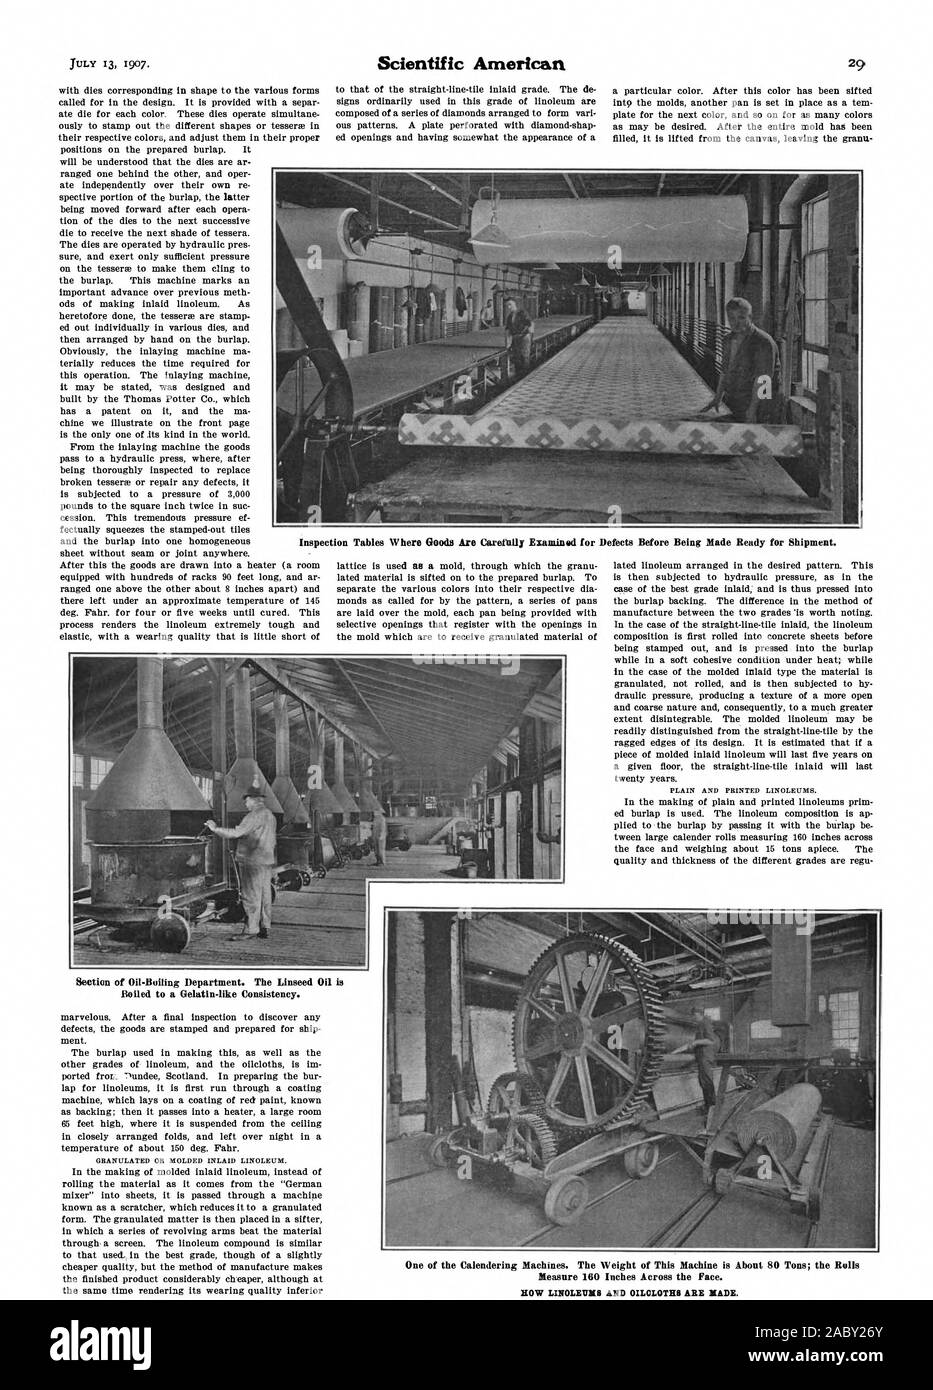 Inspection Tables Where Goods Are Carefully Examined for Defects Before Being Made Ready for Shipment. Boiled to a Gelatin-like Consistency. One of the Calendering Machines. The Weight of This Machine is About 80 Tons; the Rolls Measure 160 Inches Across the Face. HOW LINOLEI8 AND OILCLOTHS ARE MADE., scientific american, 1907-07-13 Stock Photo